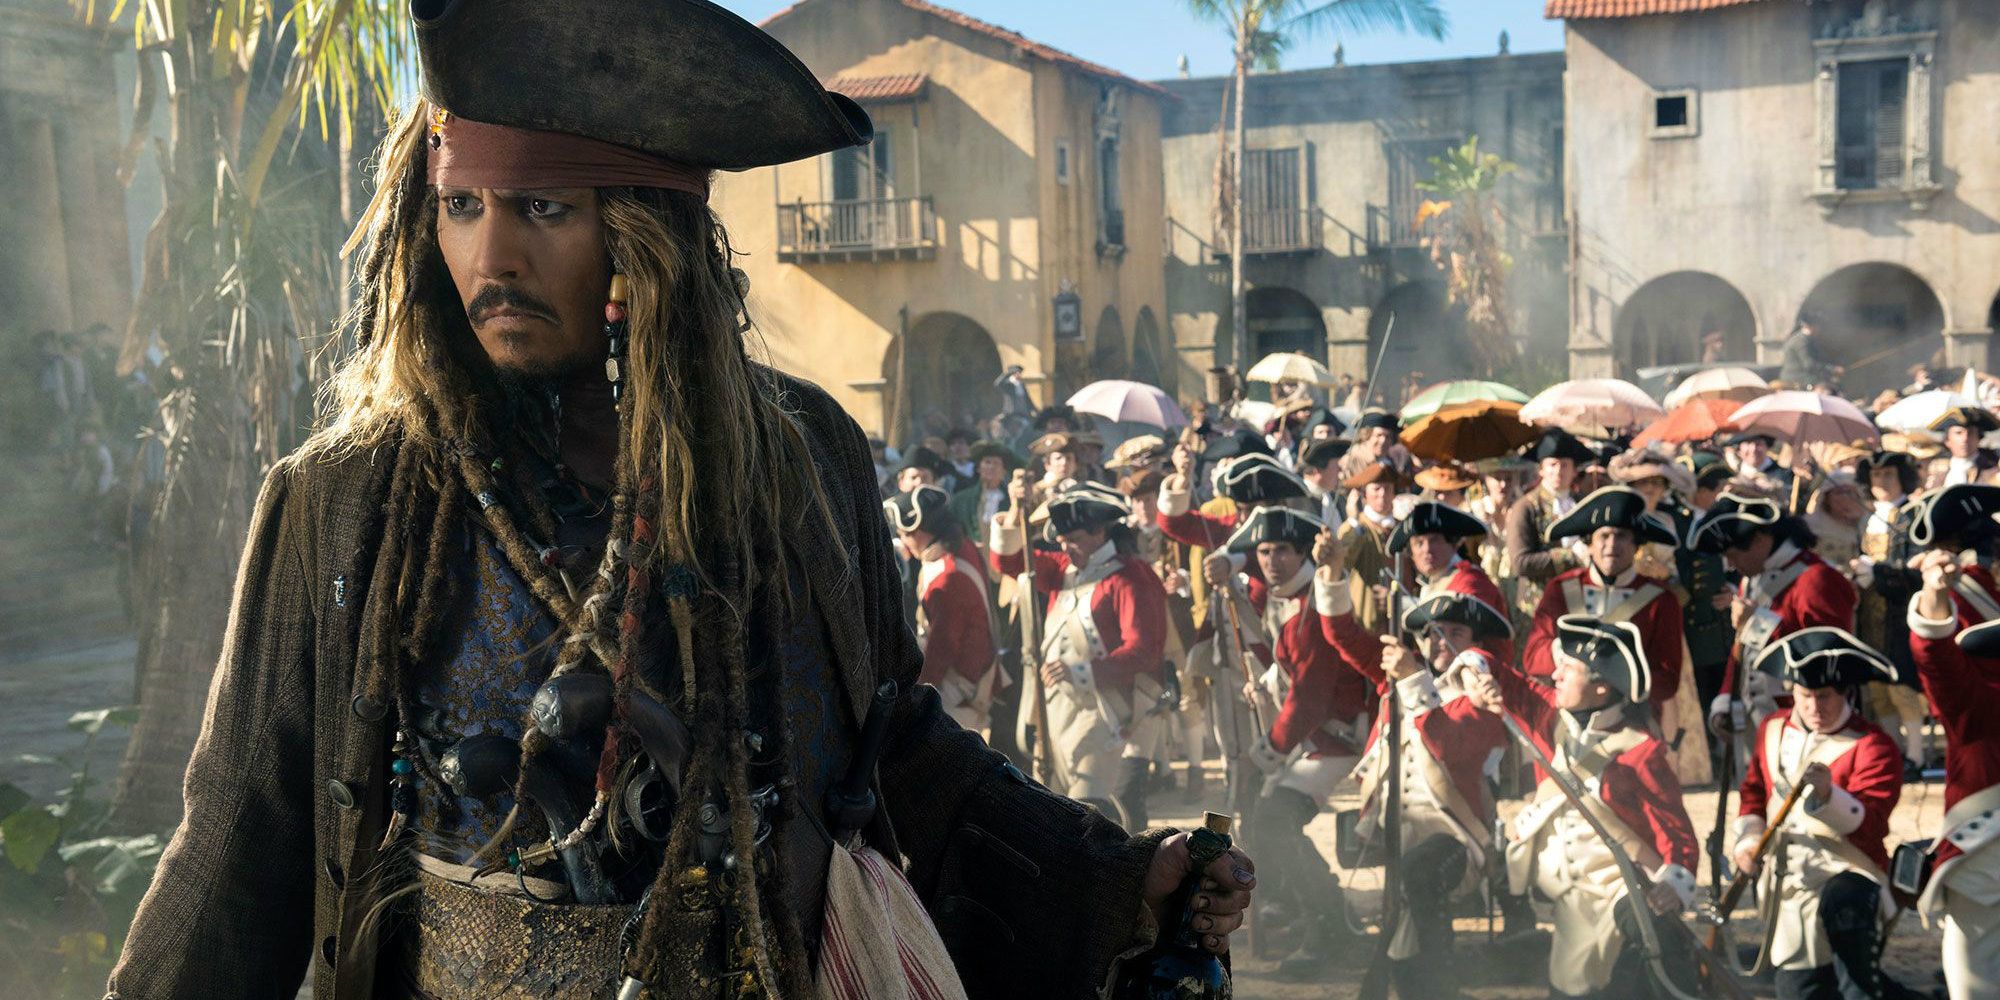 Johnny Depp in Pirates of the Caribbean Dead Men Tell No Tales